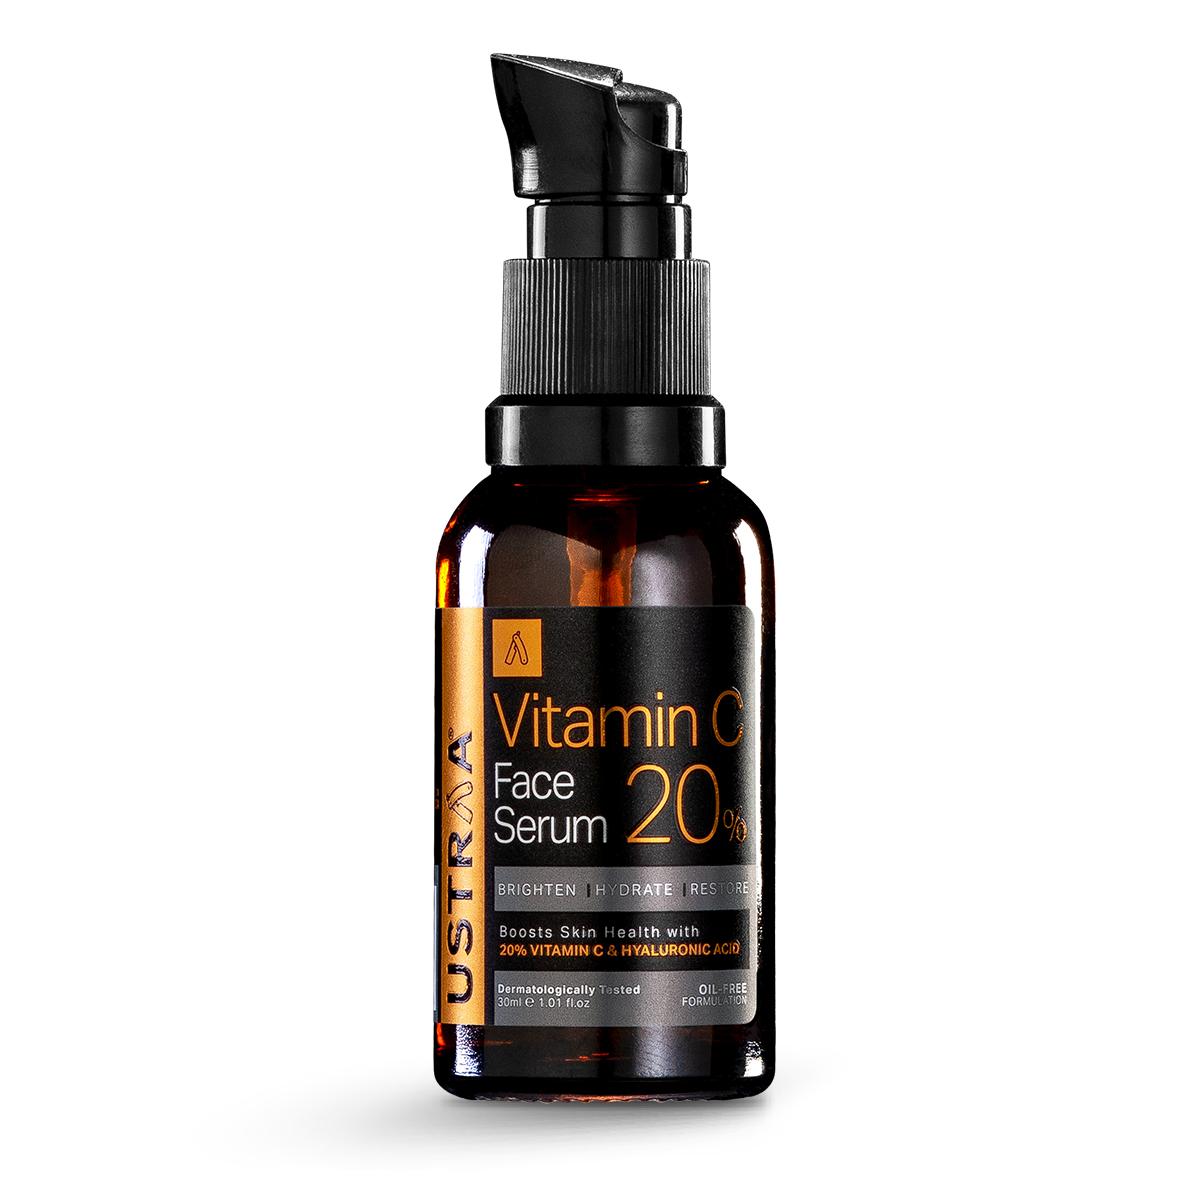 Ustraa 20% Vitamin C Face Serum with Hyaluronic Acid helps fight signs of aging, brightens, and hydrates the skin.